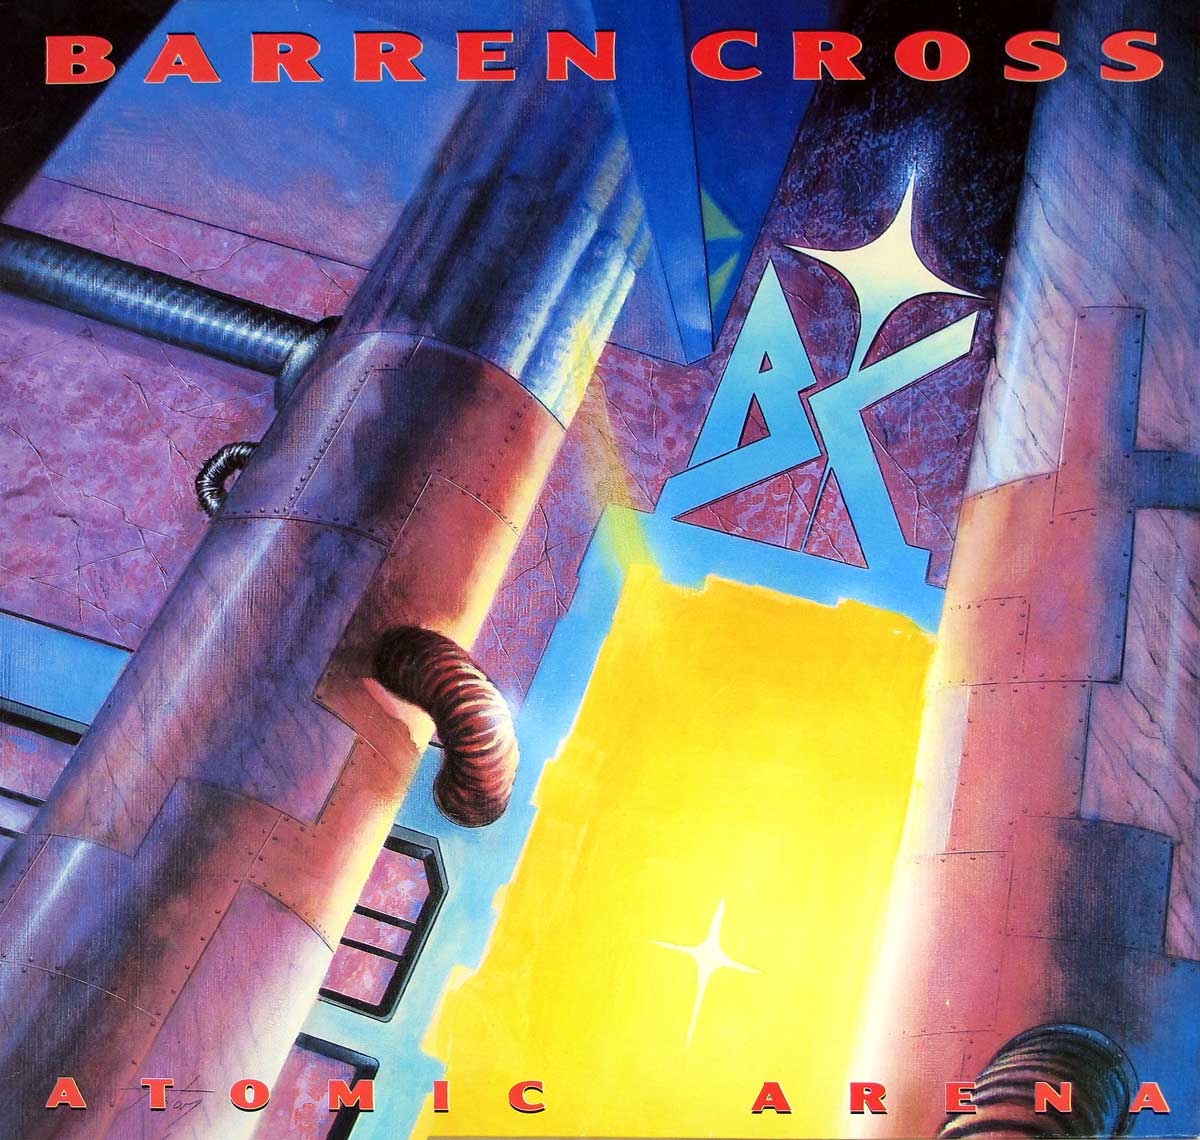 High Quality Photo of Album Front Cover  "BARREN CROSS - Atomic Arena "